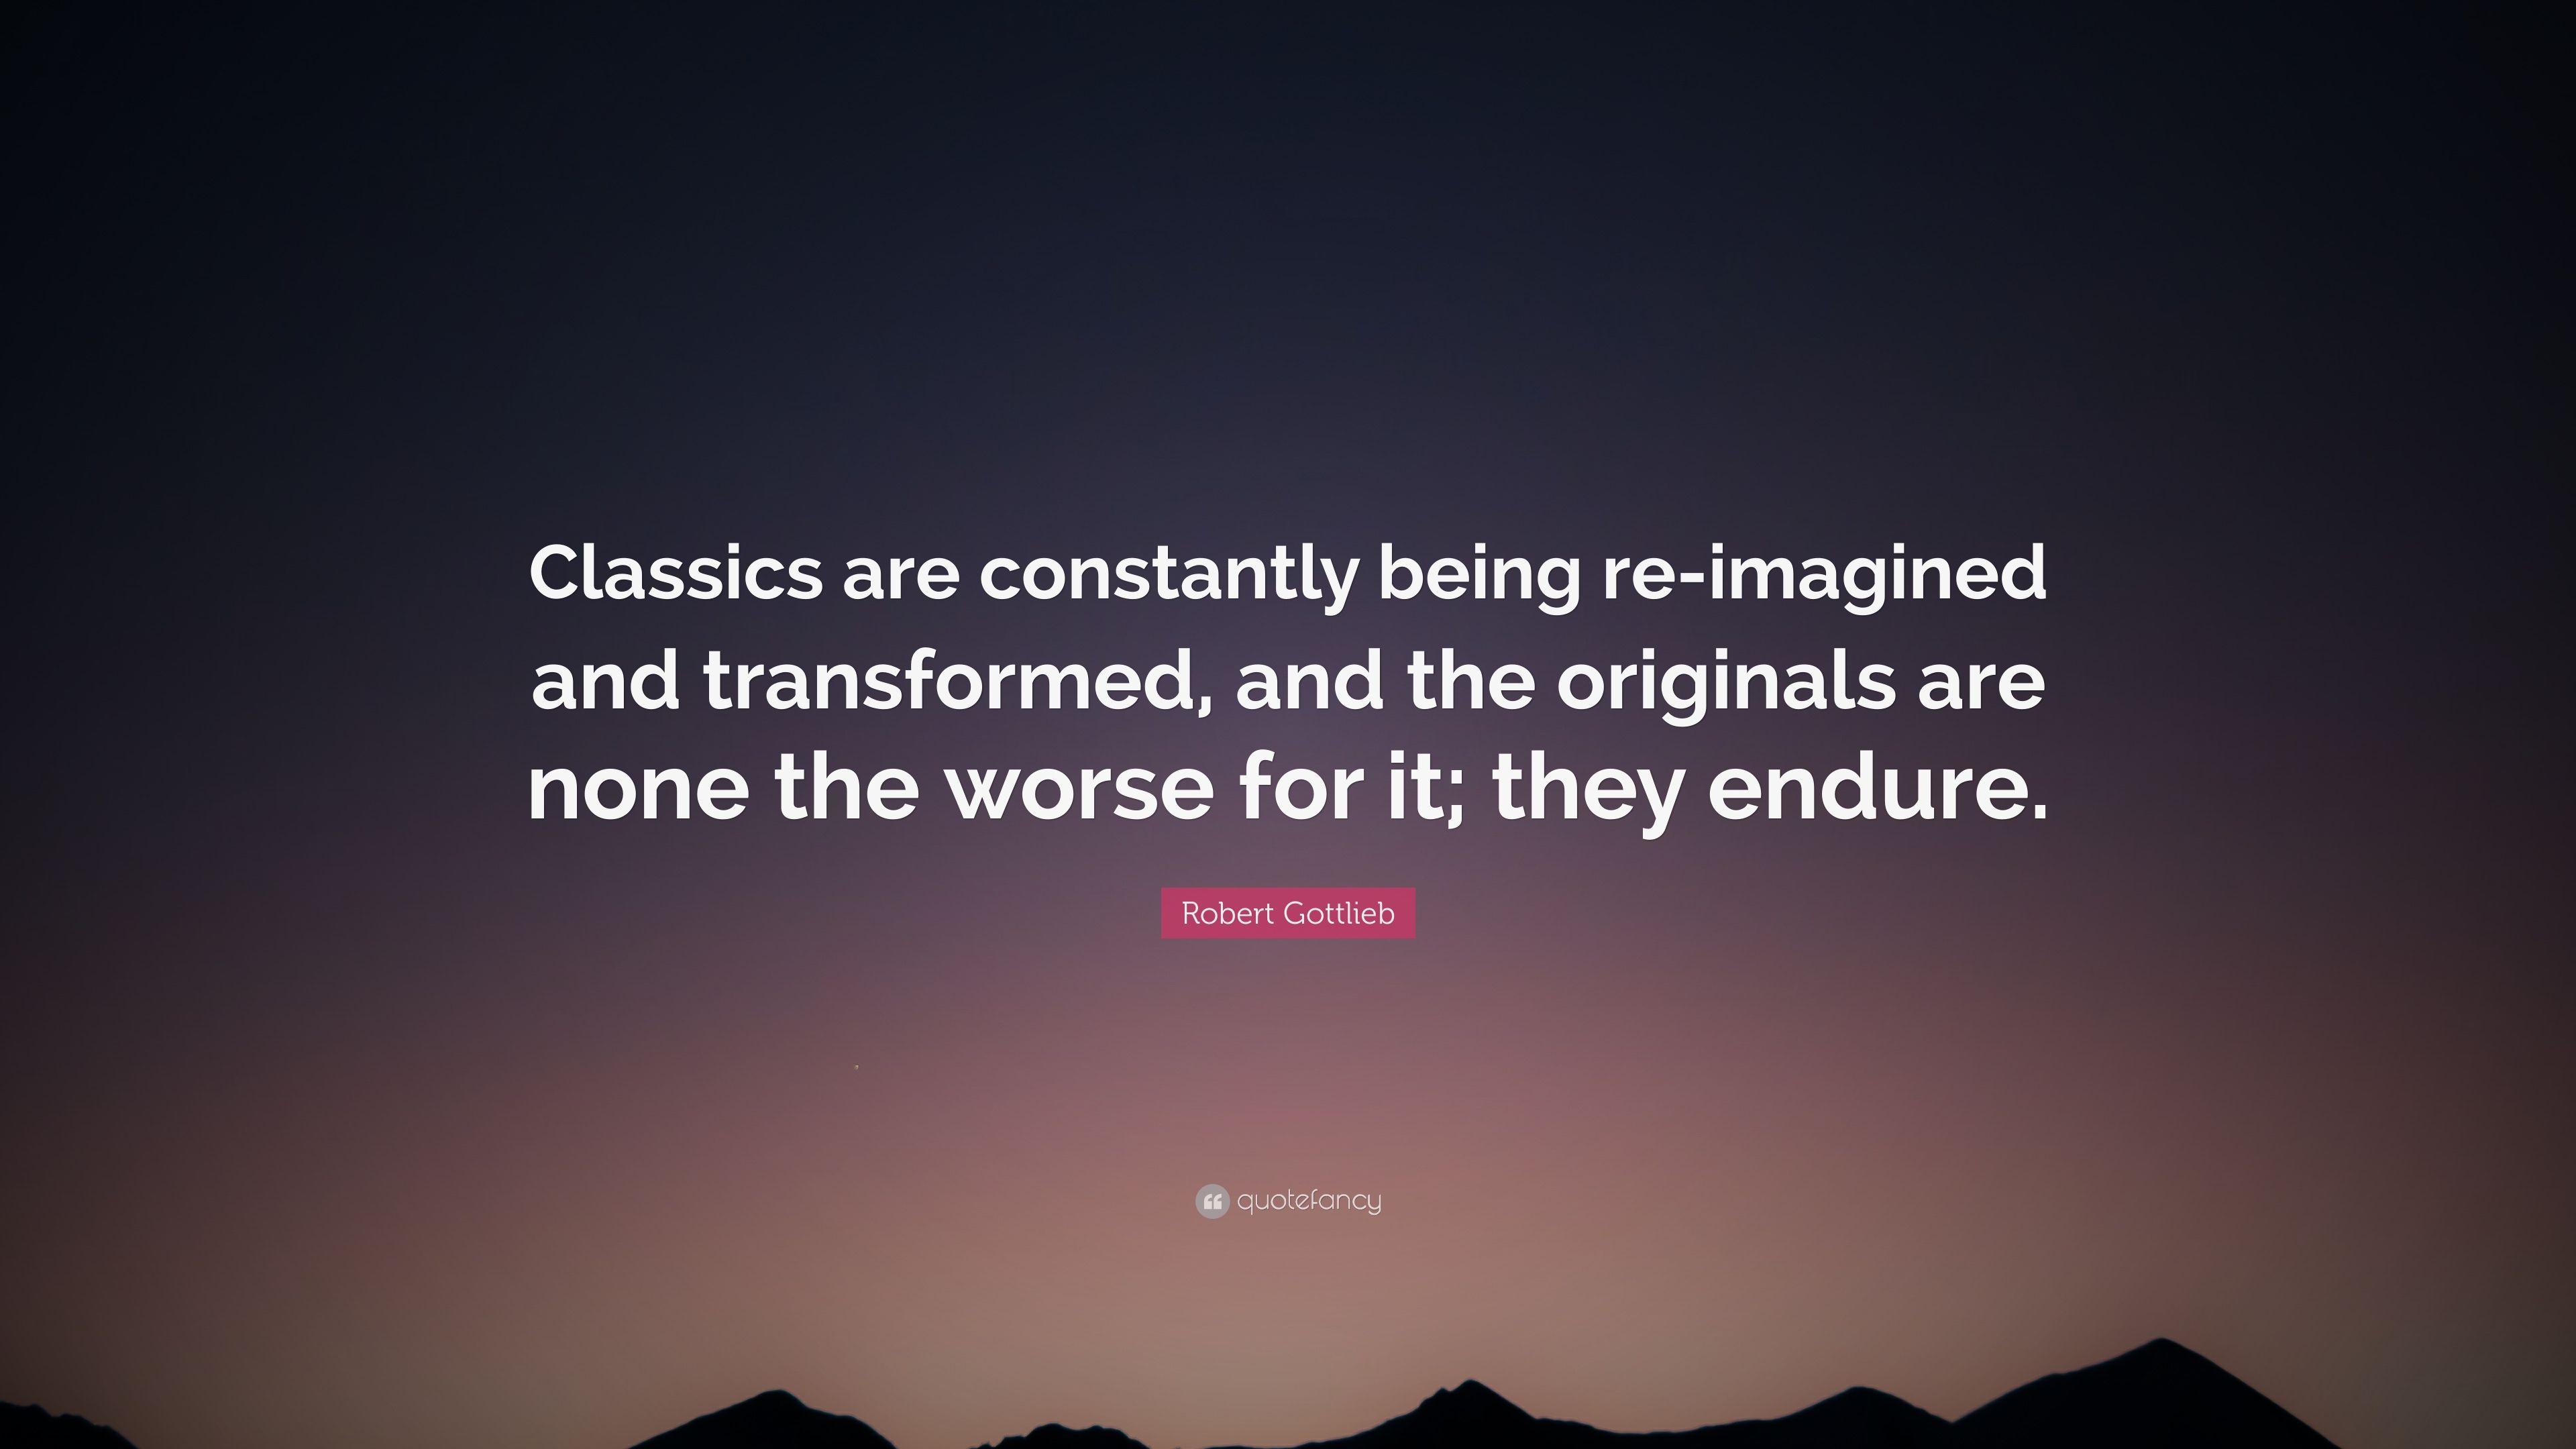 Robert Gottlieb Quote: “Classics are constantly being re